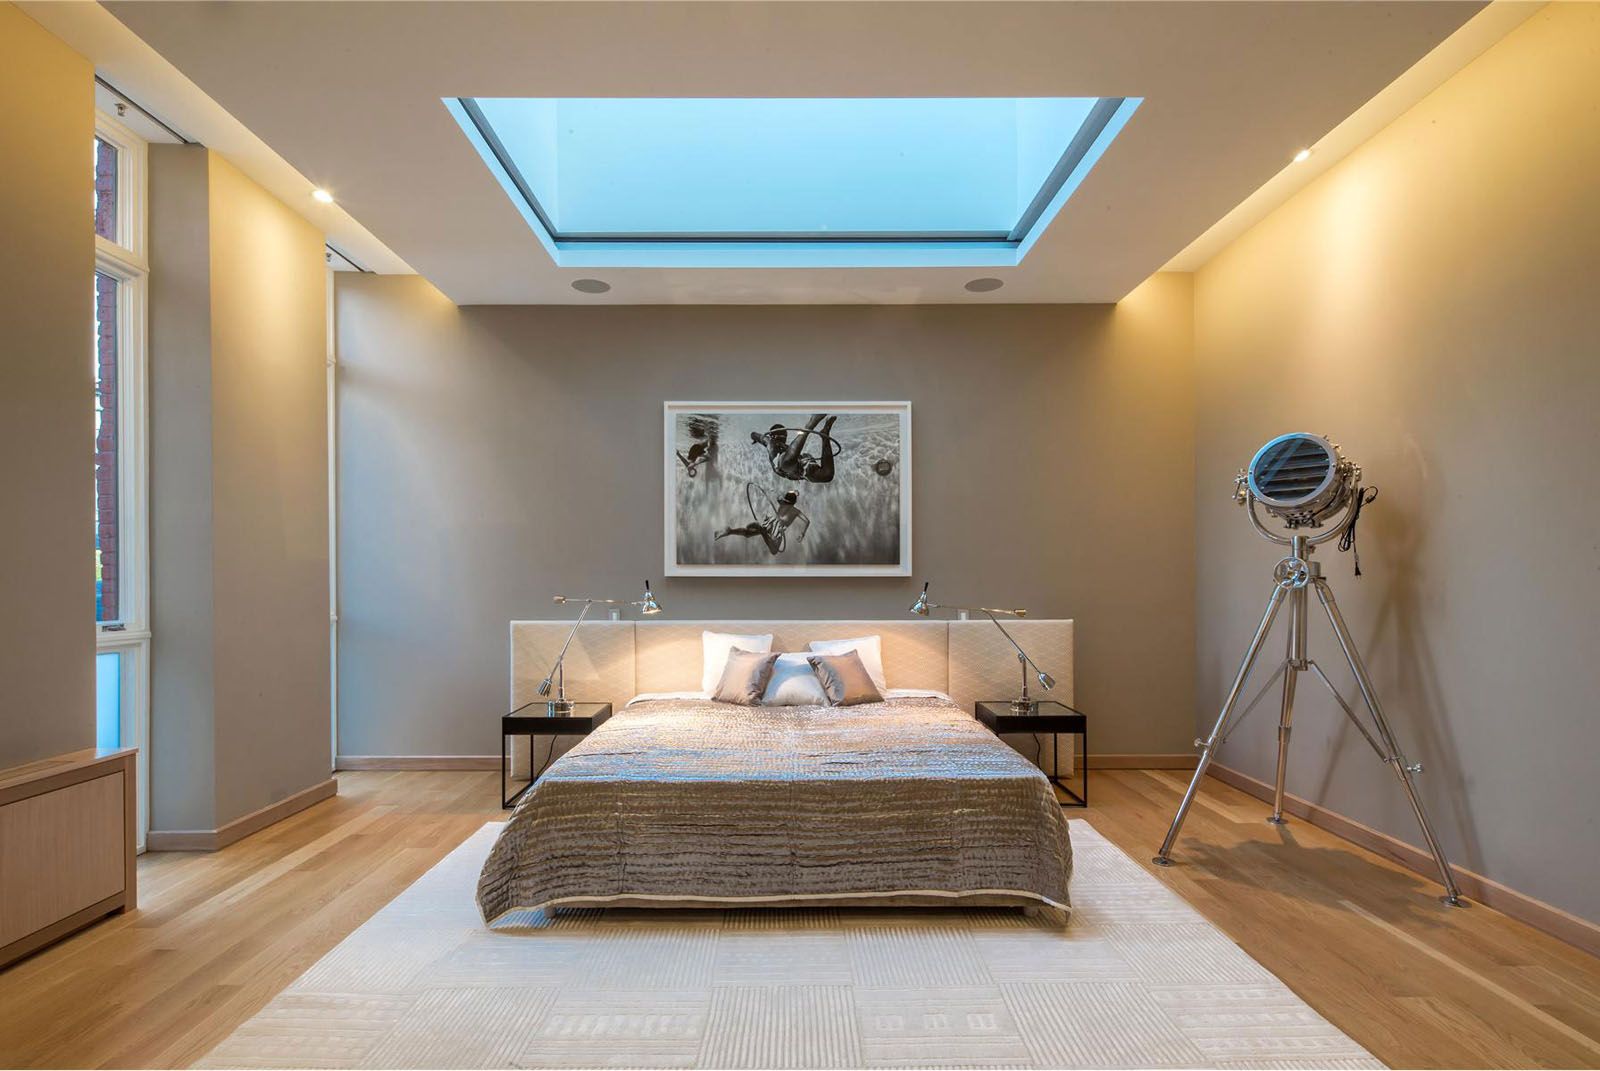 Ceiling with Skylight